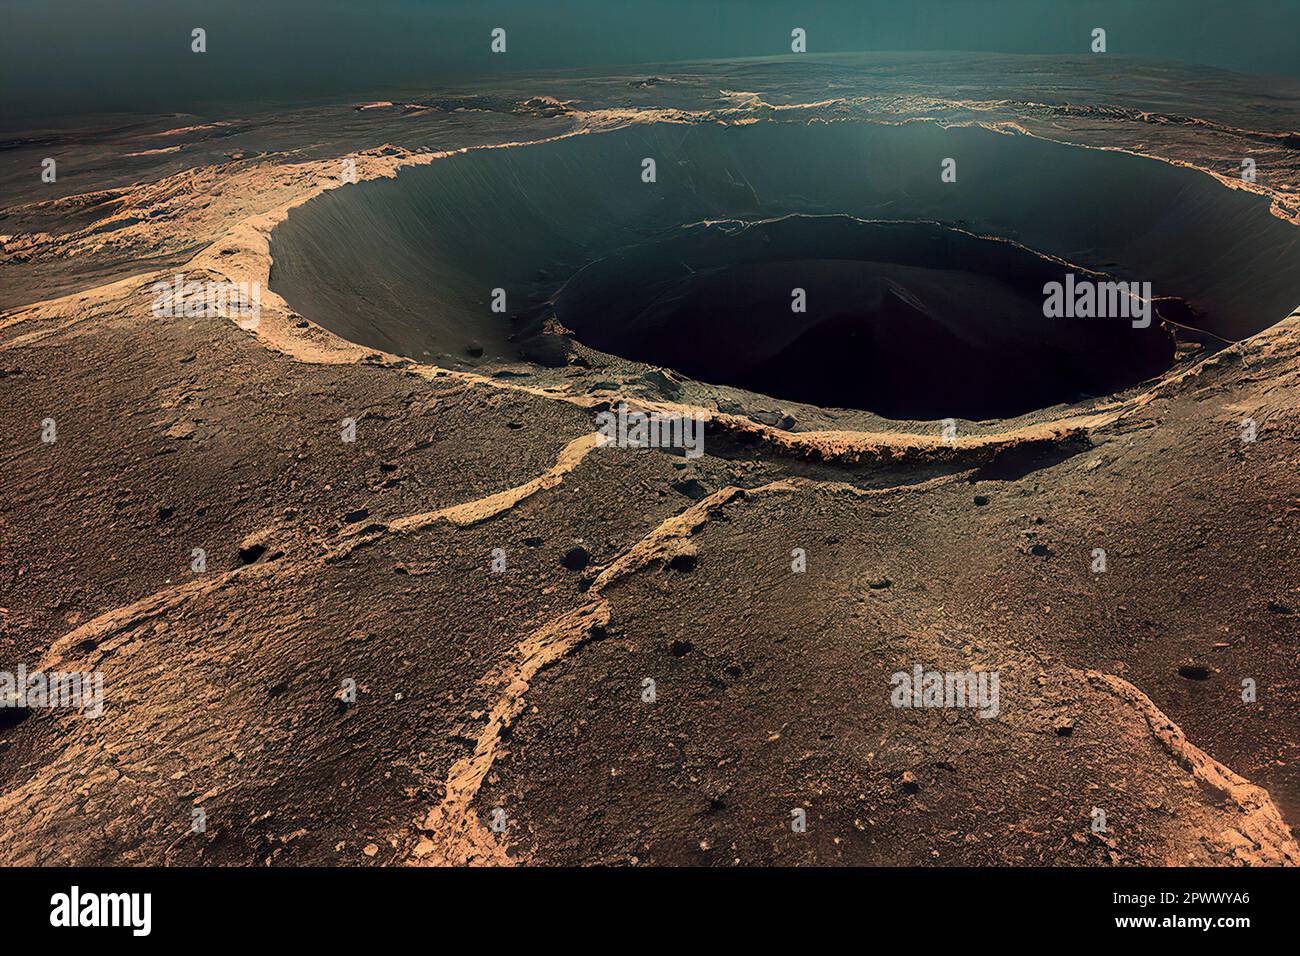 Large Impact Crater on a Barren Landscape Stock Photo